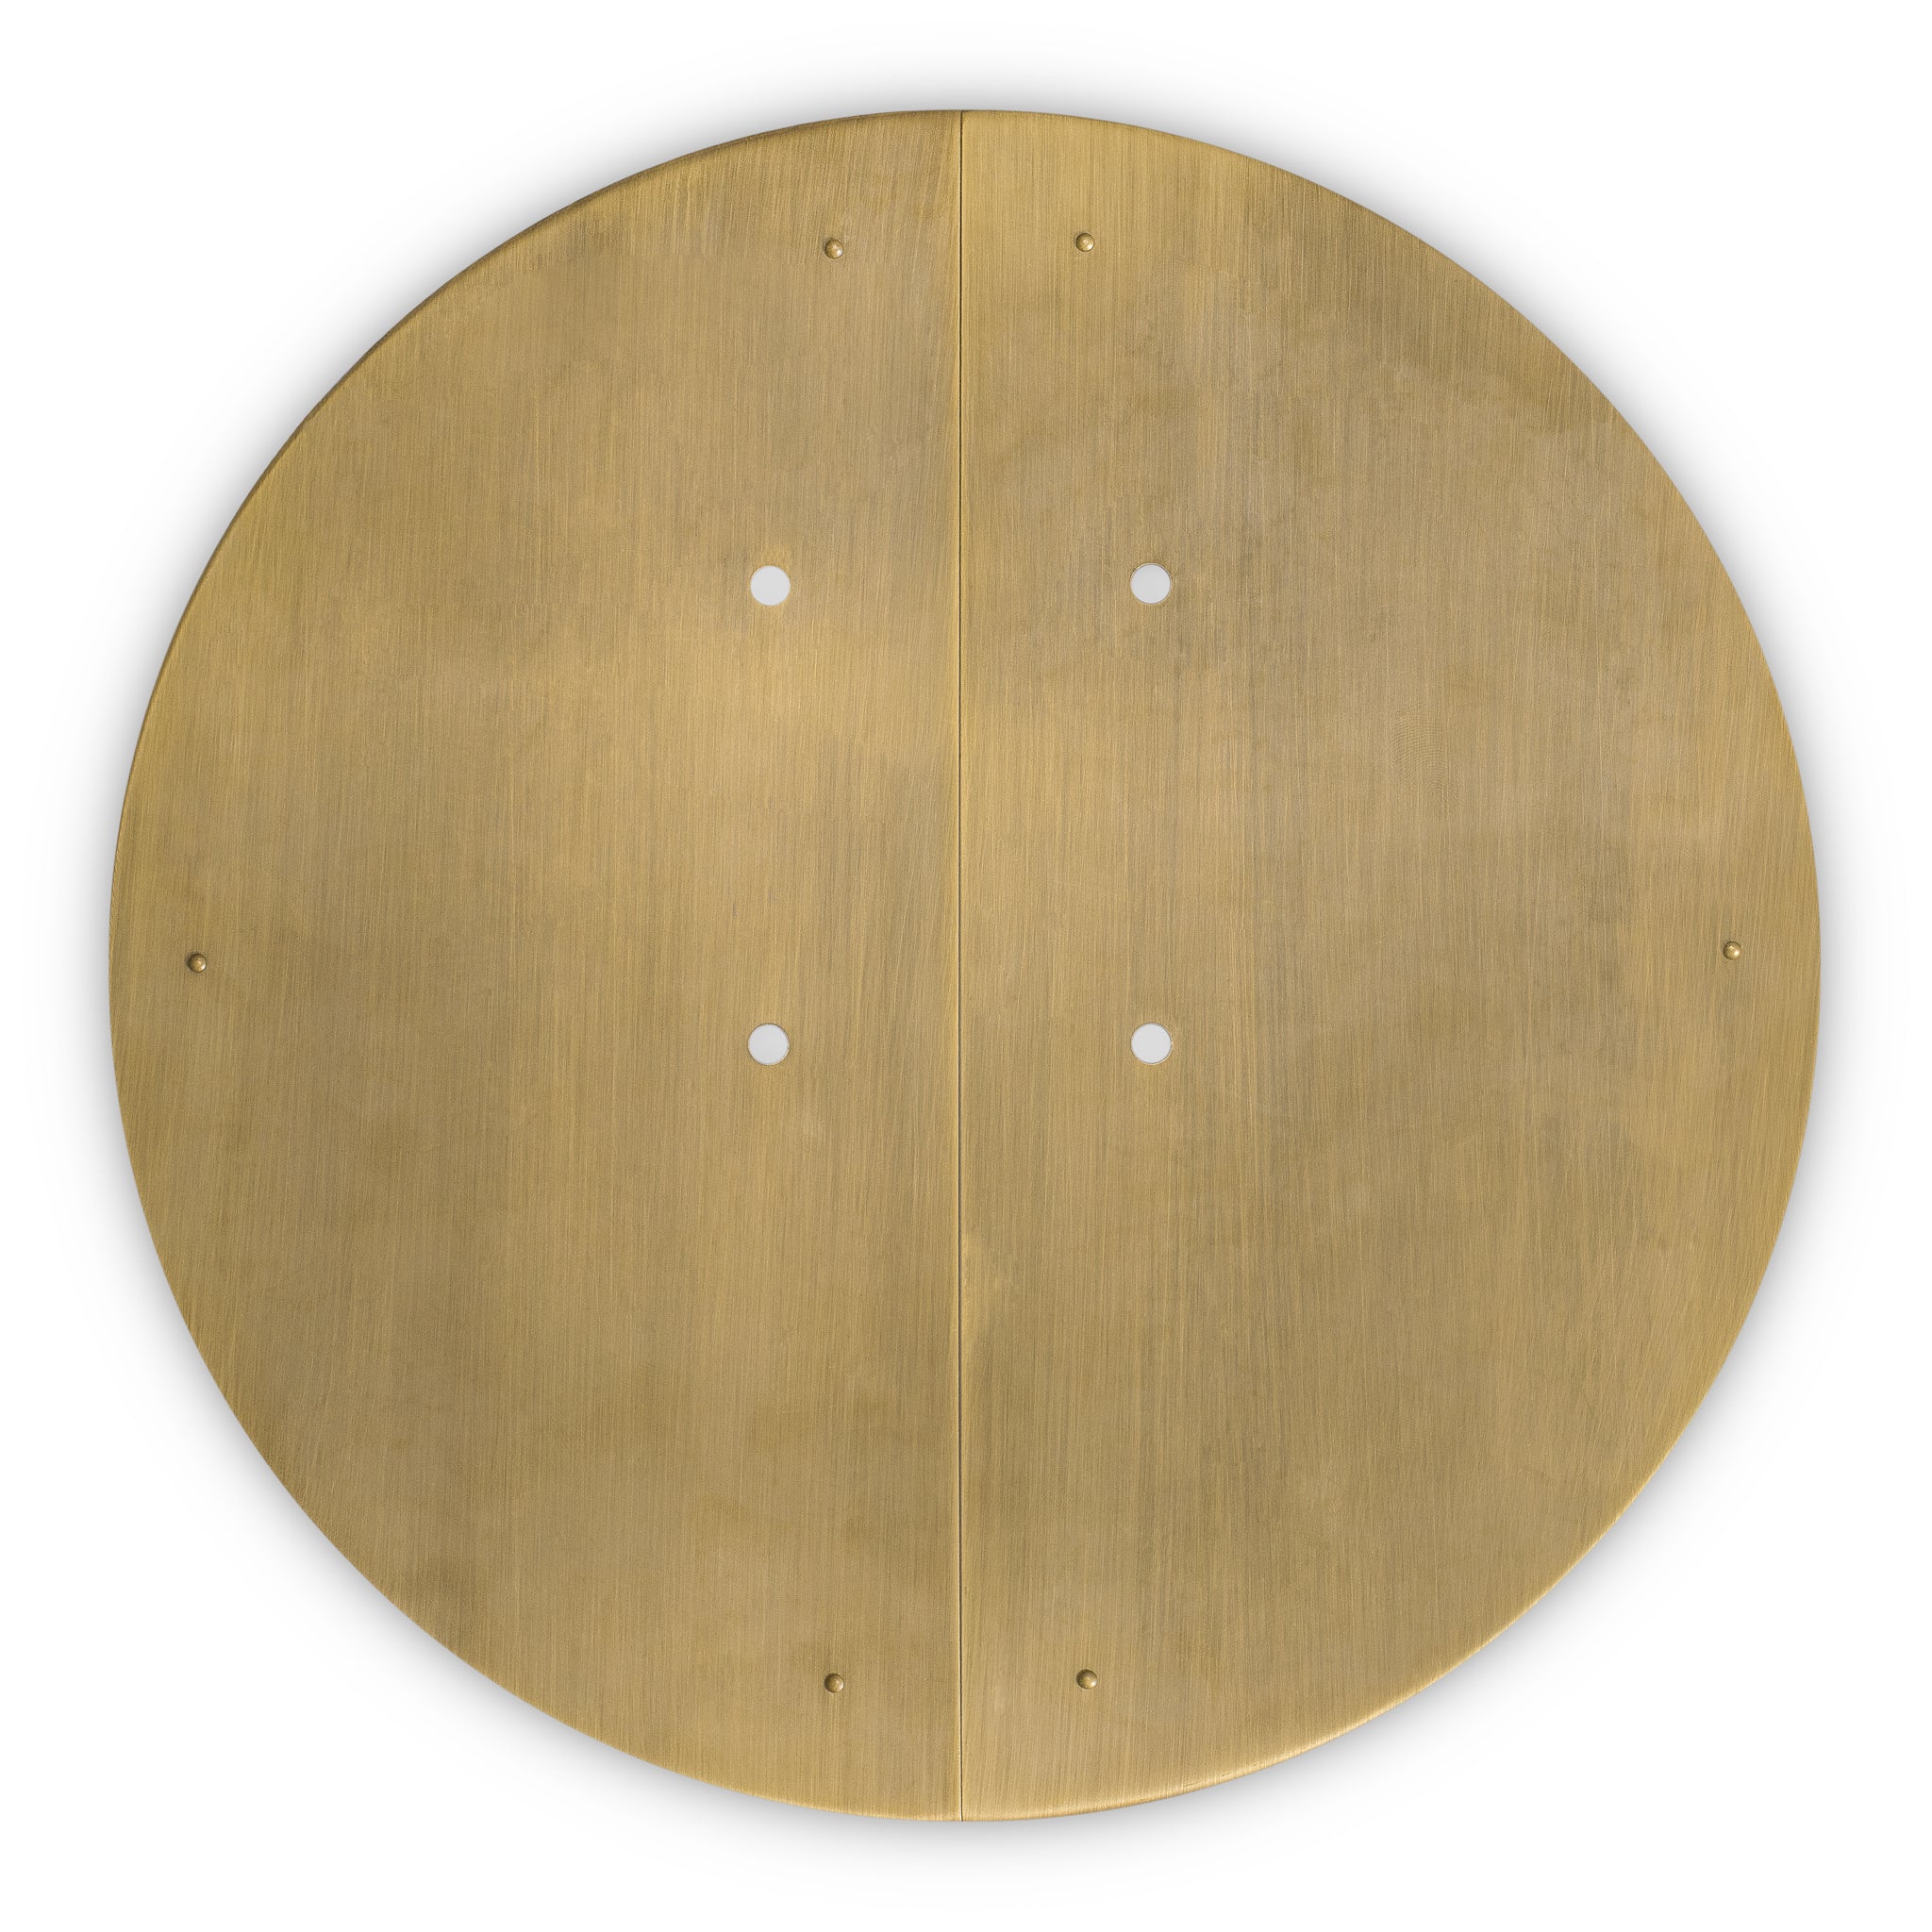 Classic Round Cabinet Face Plate 11"-Chinese Brass Hardware